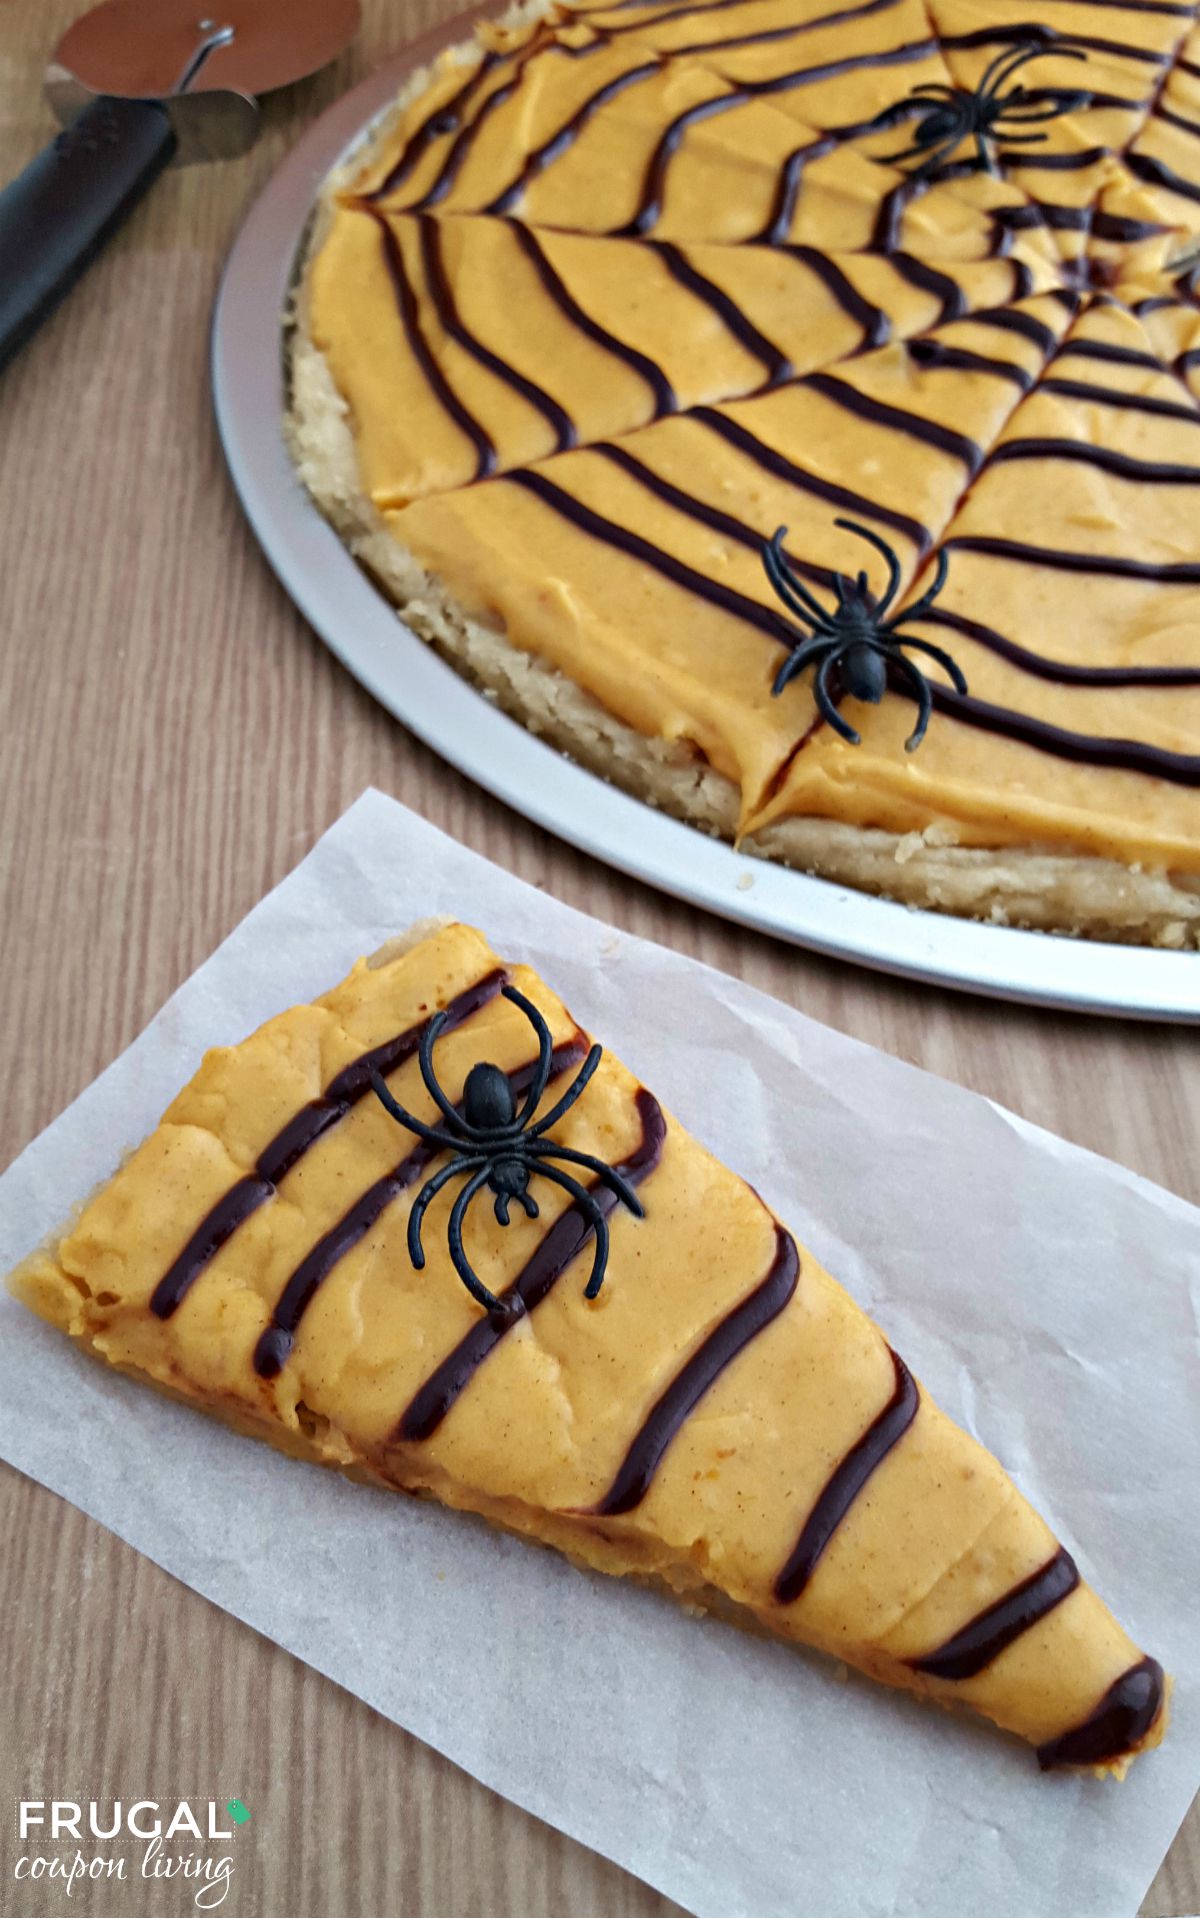 Spider-Web-Cookie-Pizza-on-Frugal-Coupon-LIving